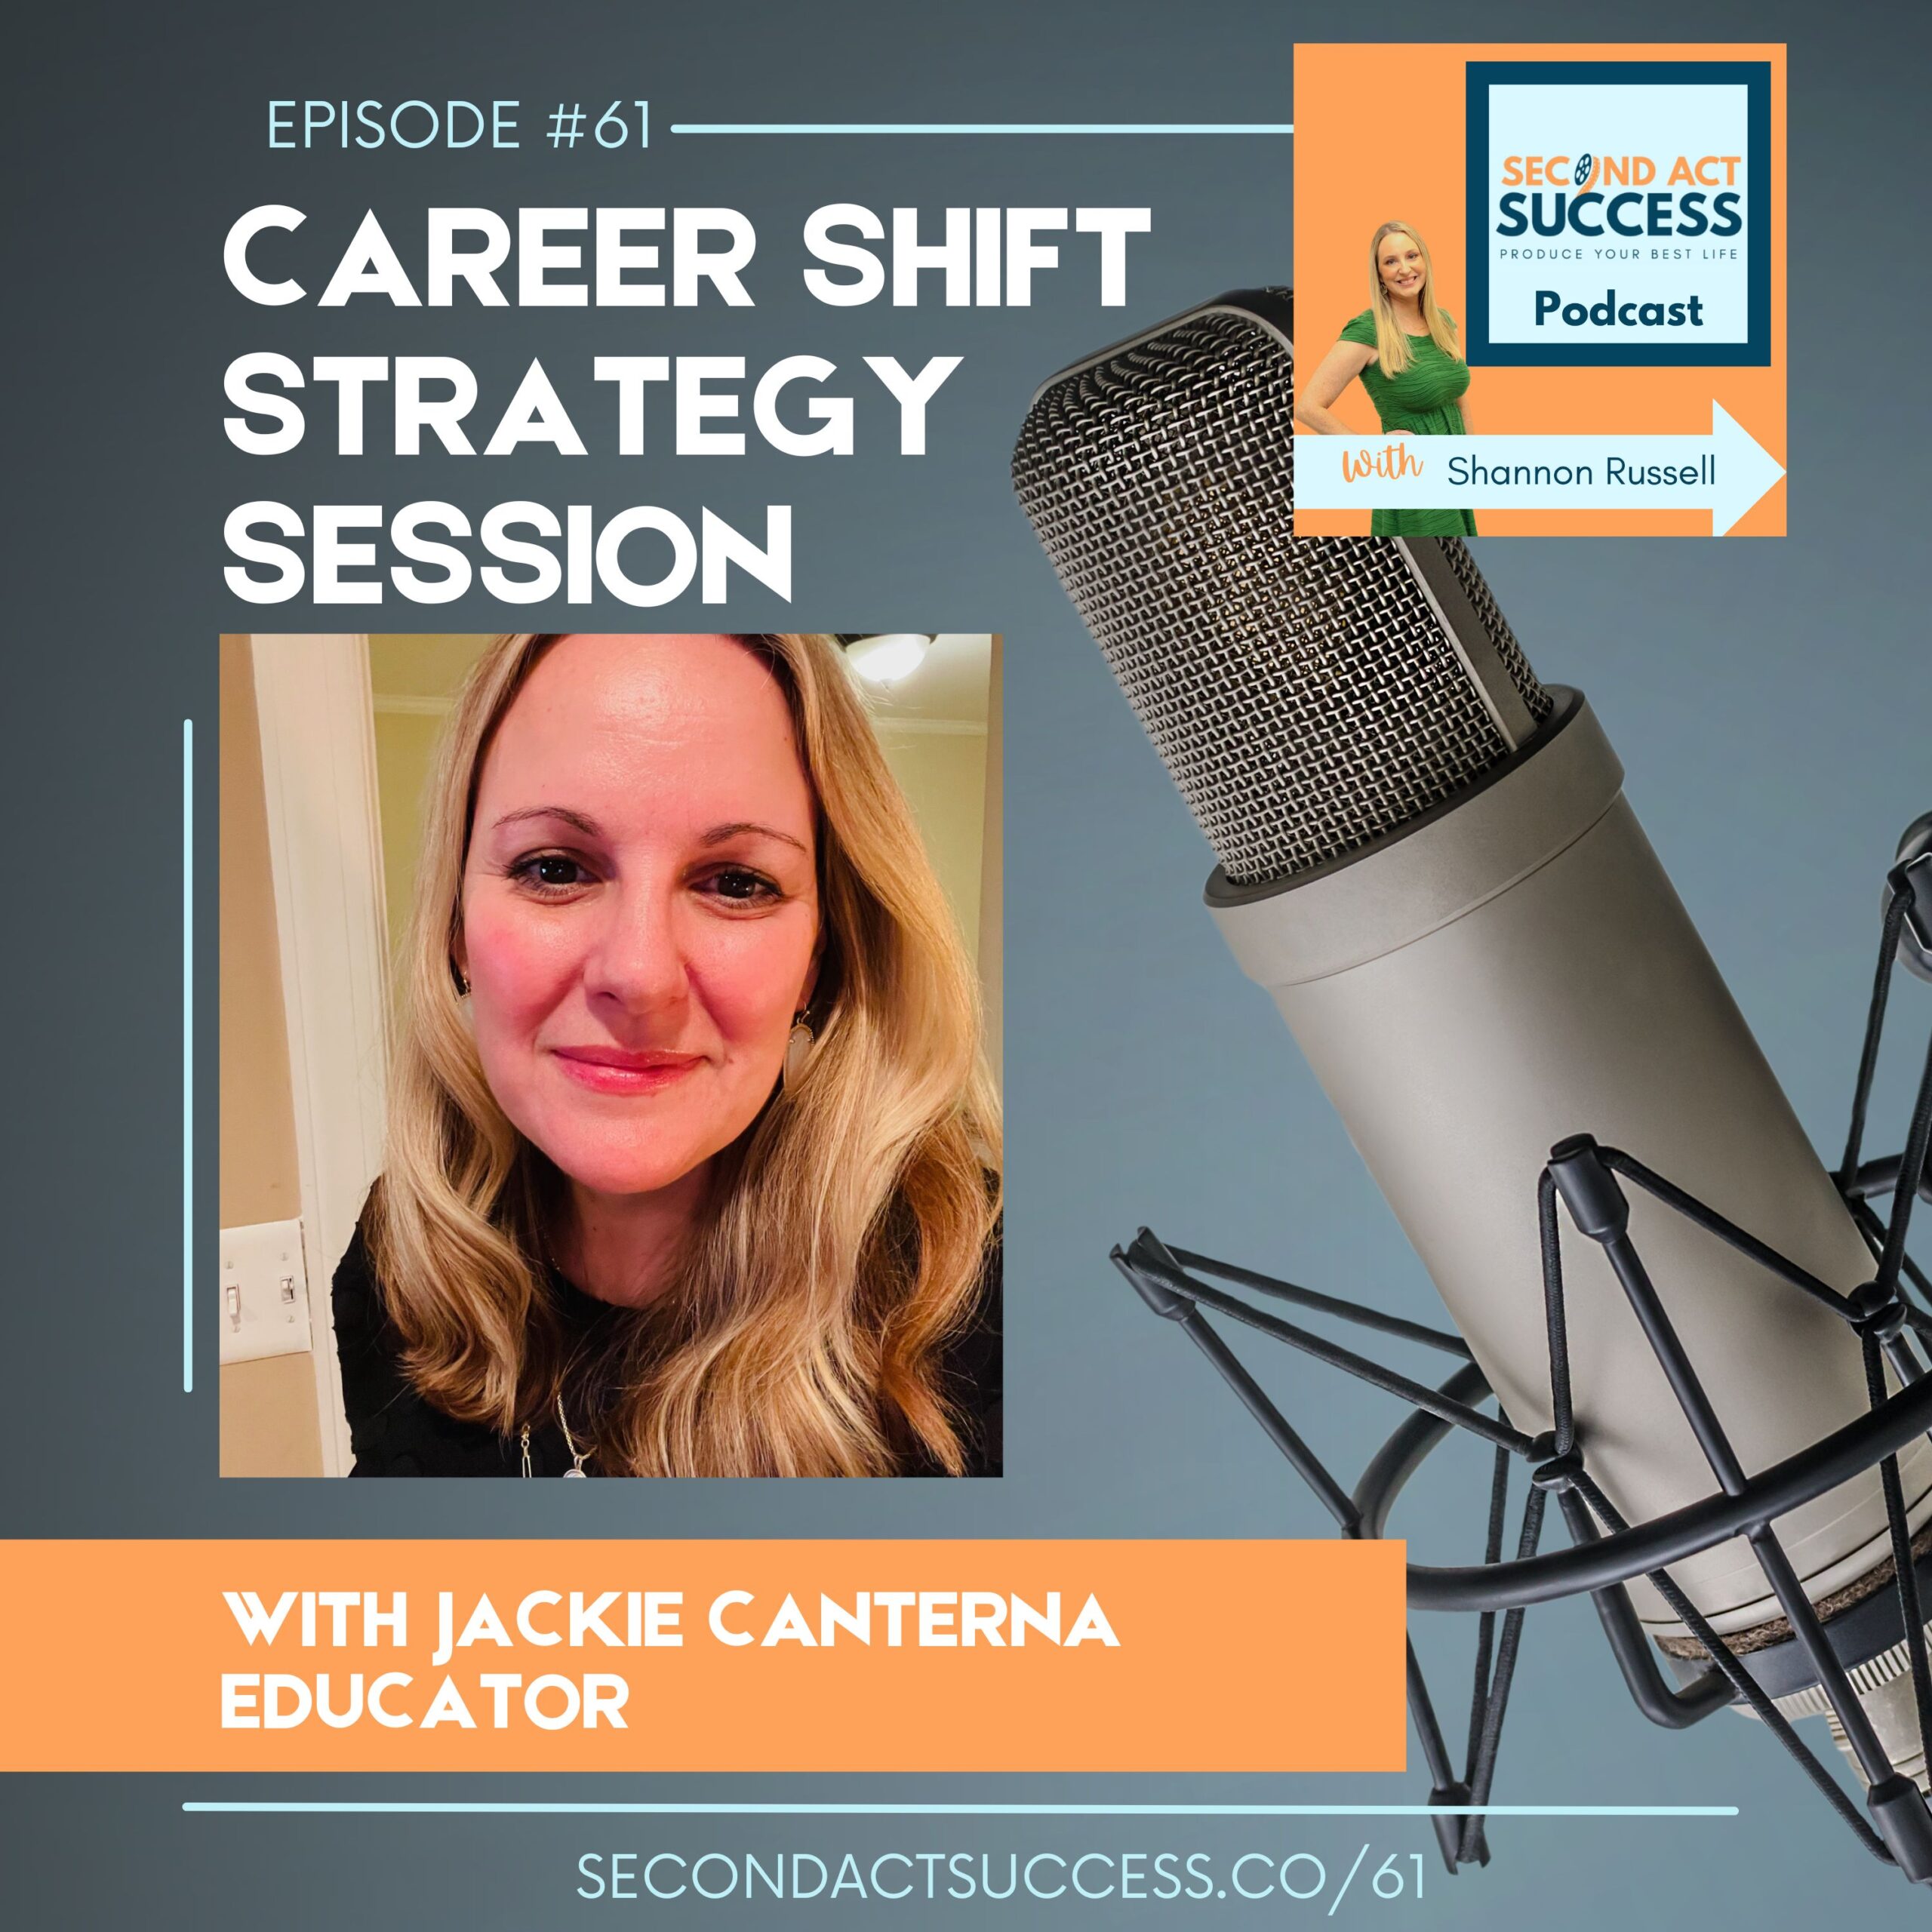 Career Shift Strategy Session with Educator, Jackie Canterna